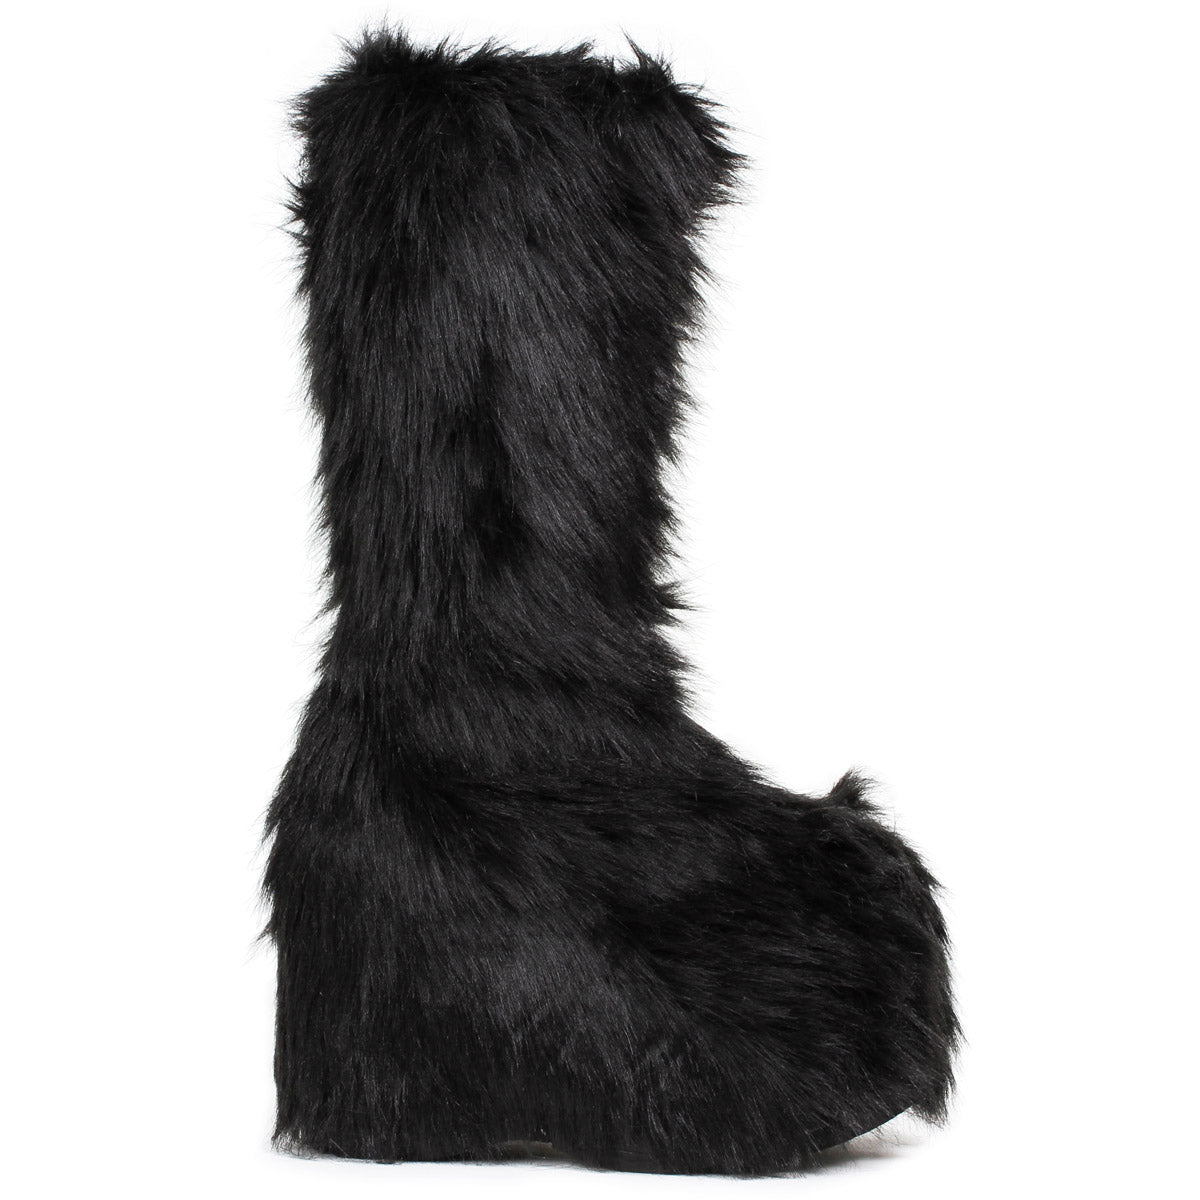 5" Chunky Heel Platform Boot with faux fur. Ellie  500/FUZZ/BLK